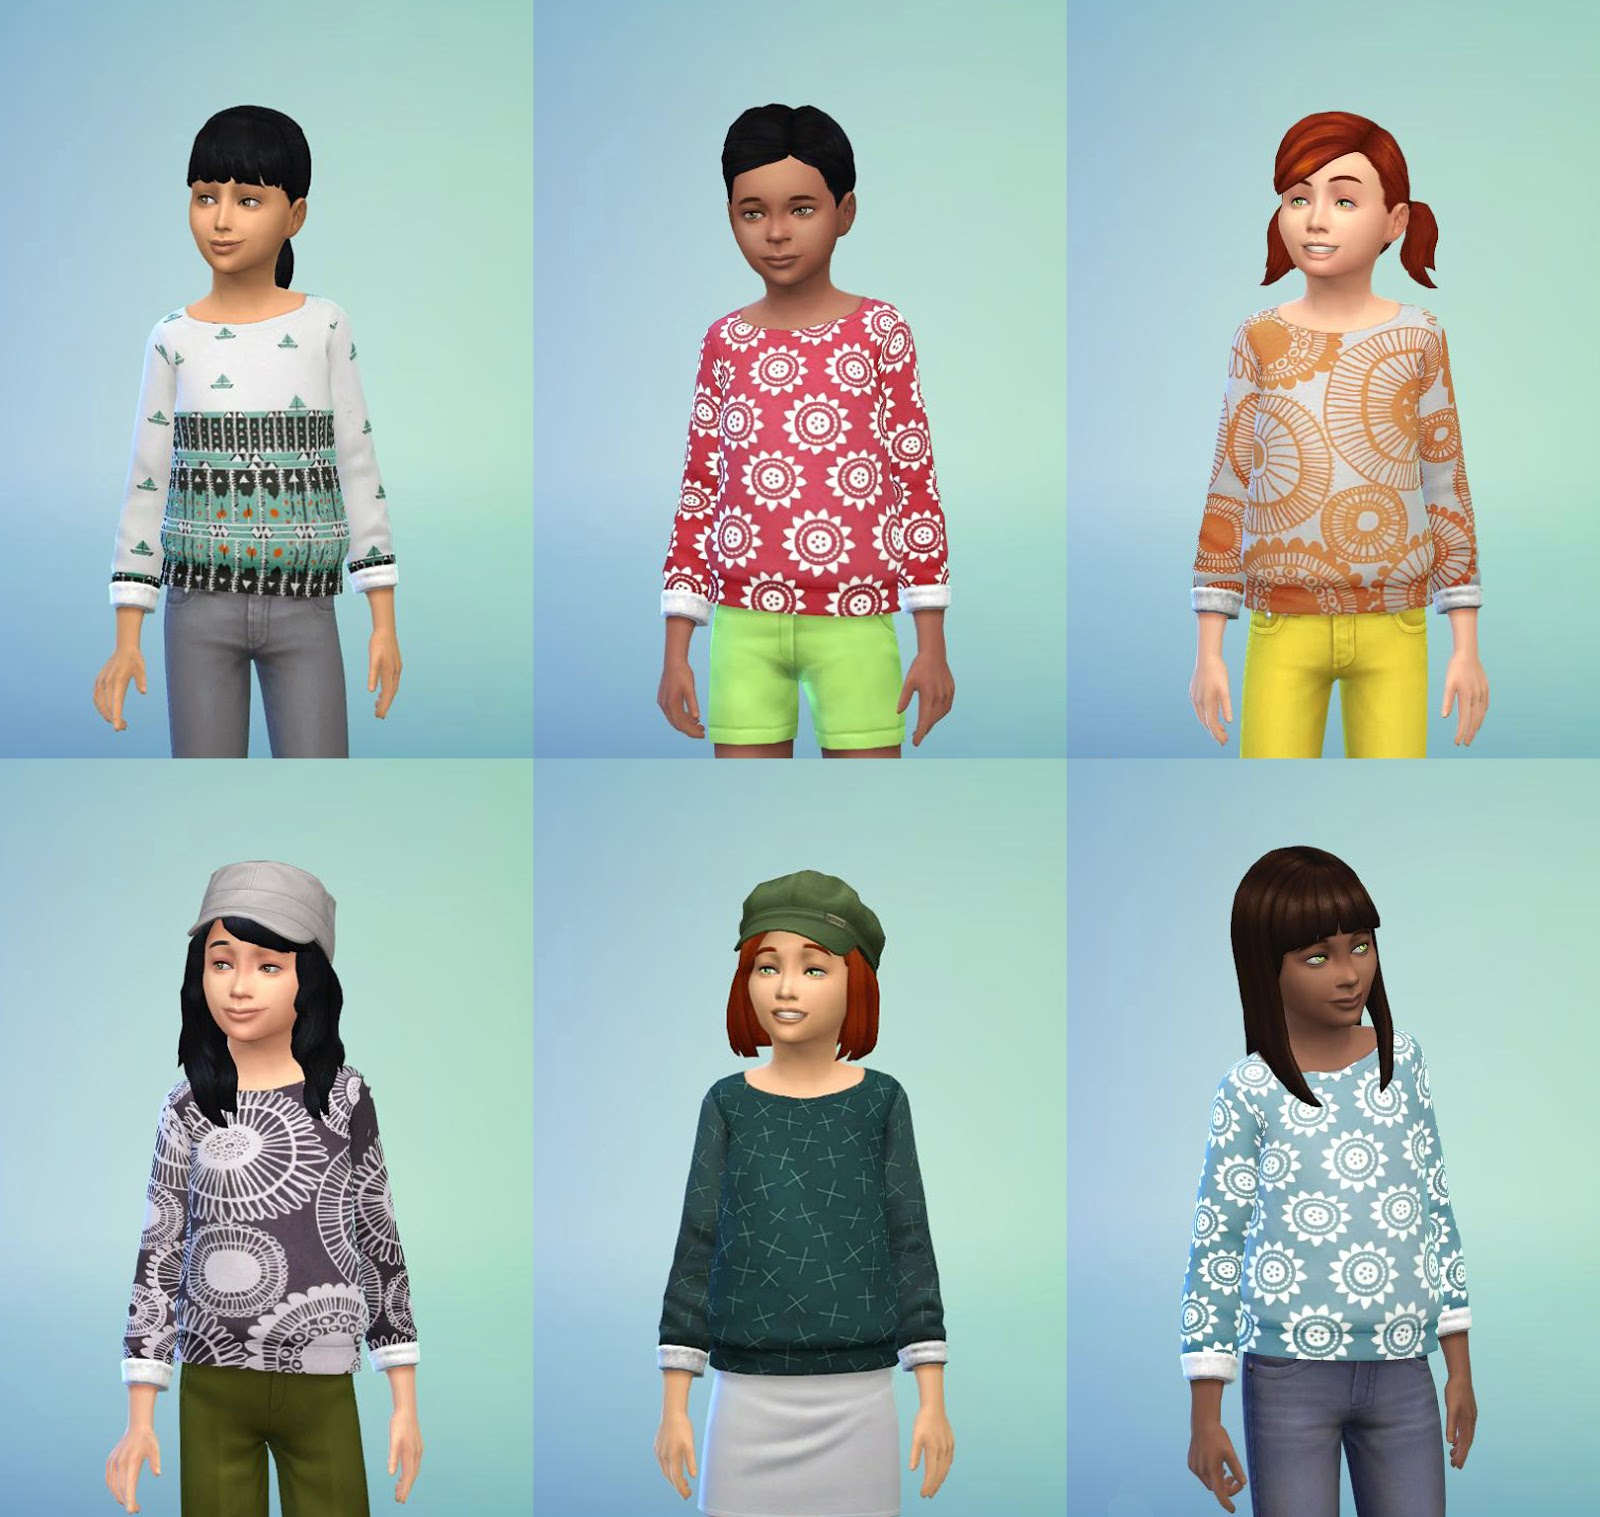 kids clothes cc the sims 4